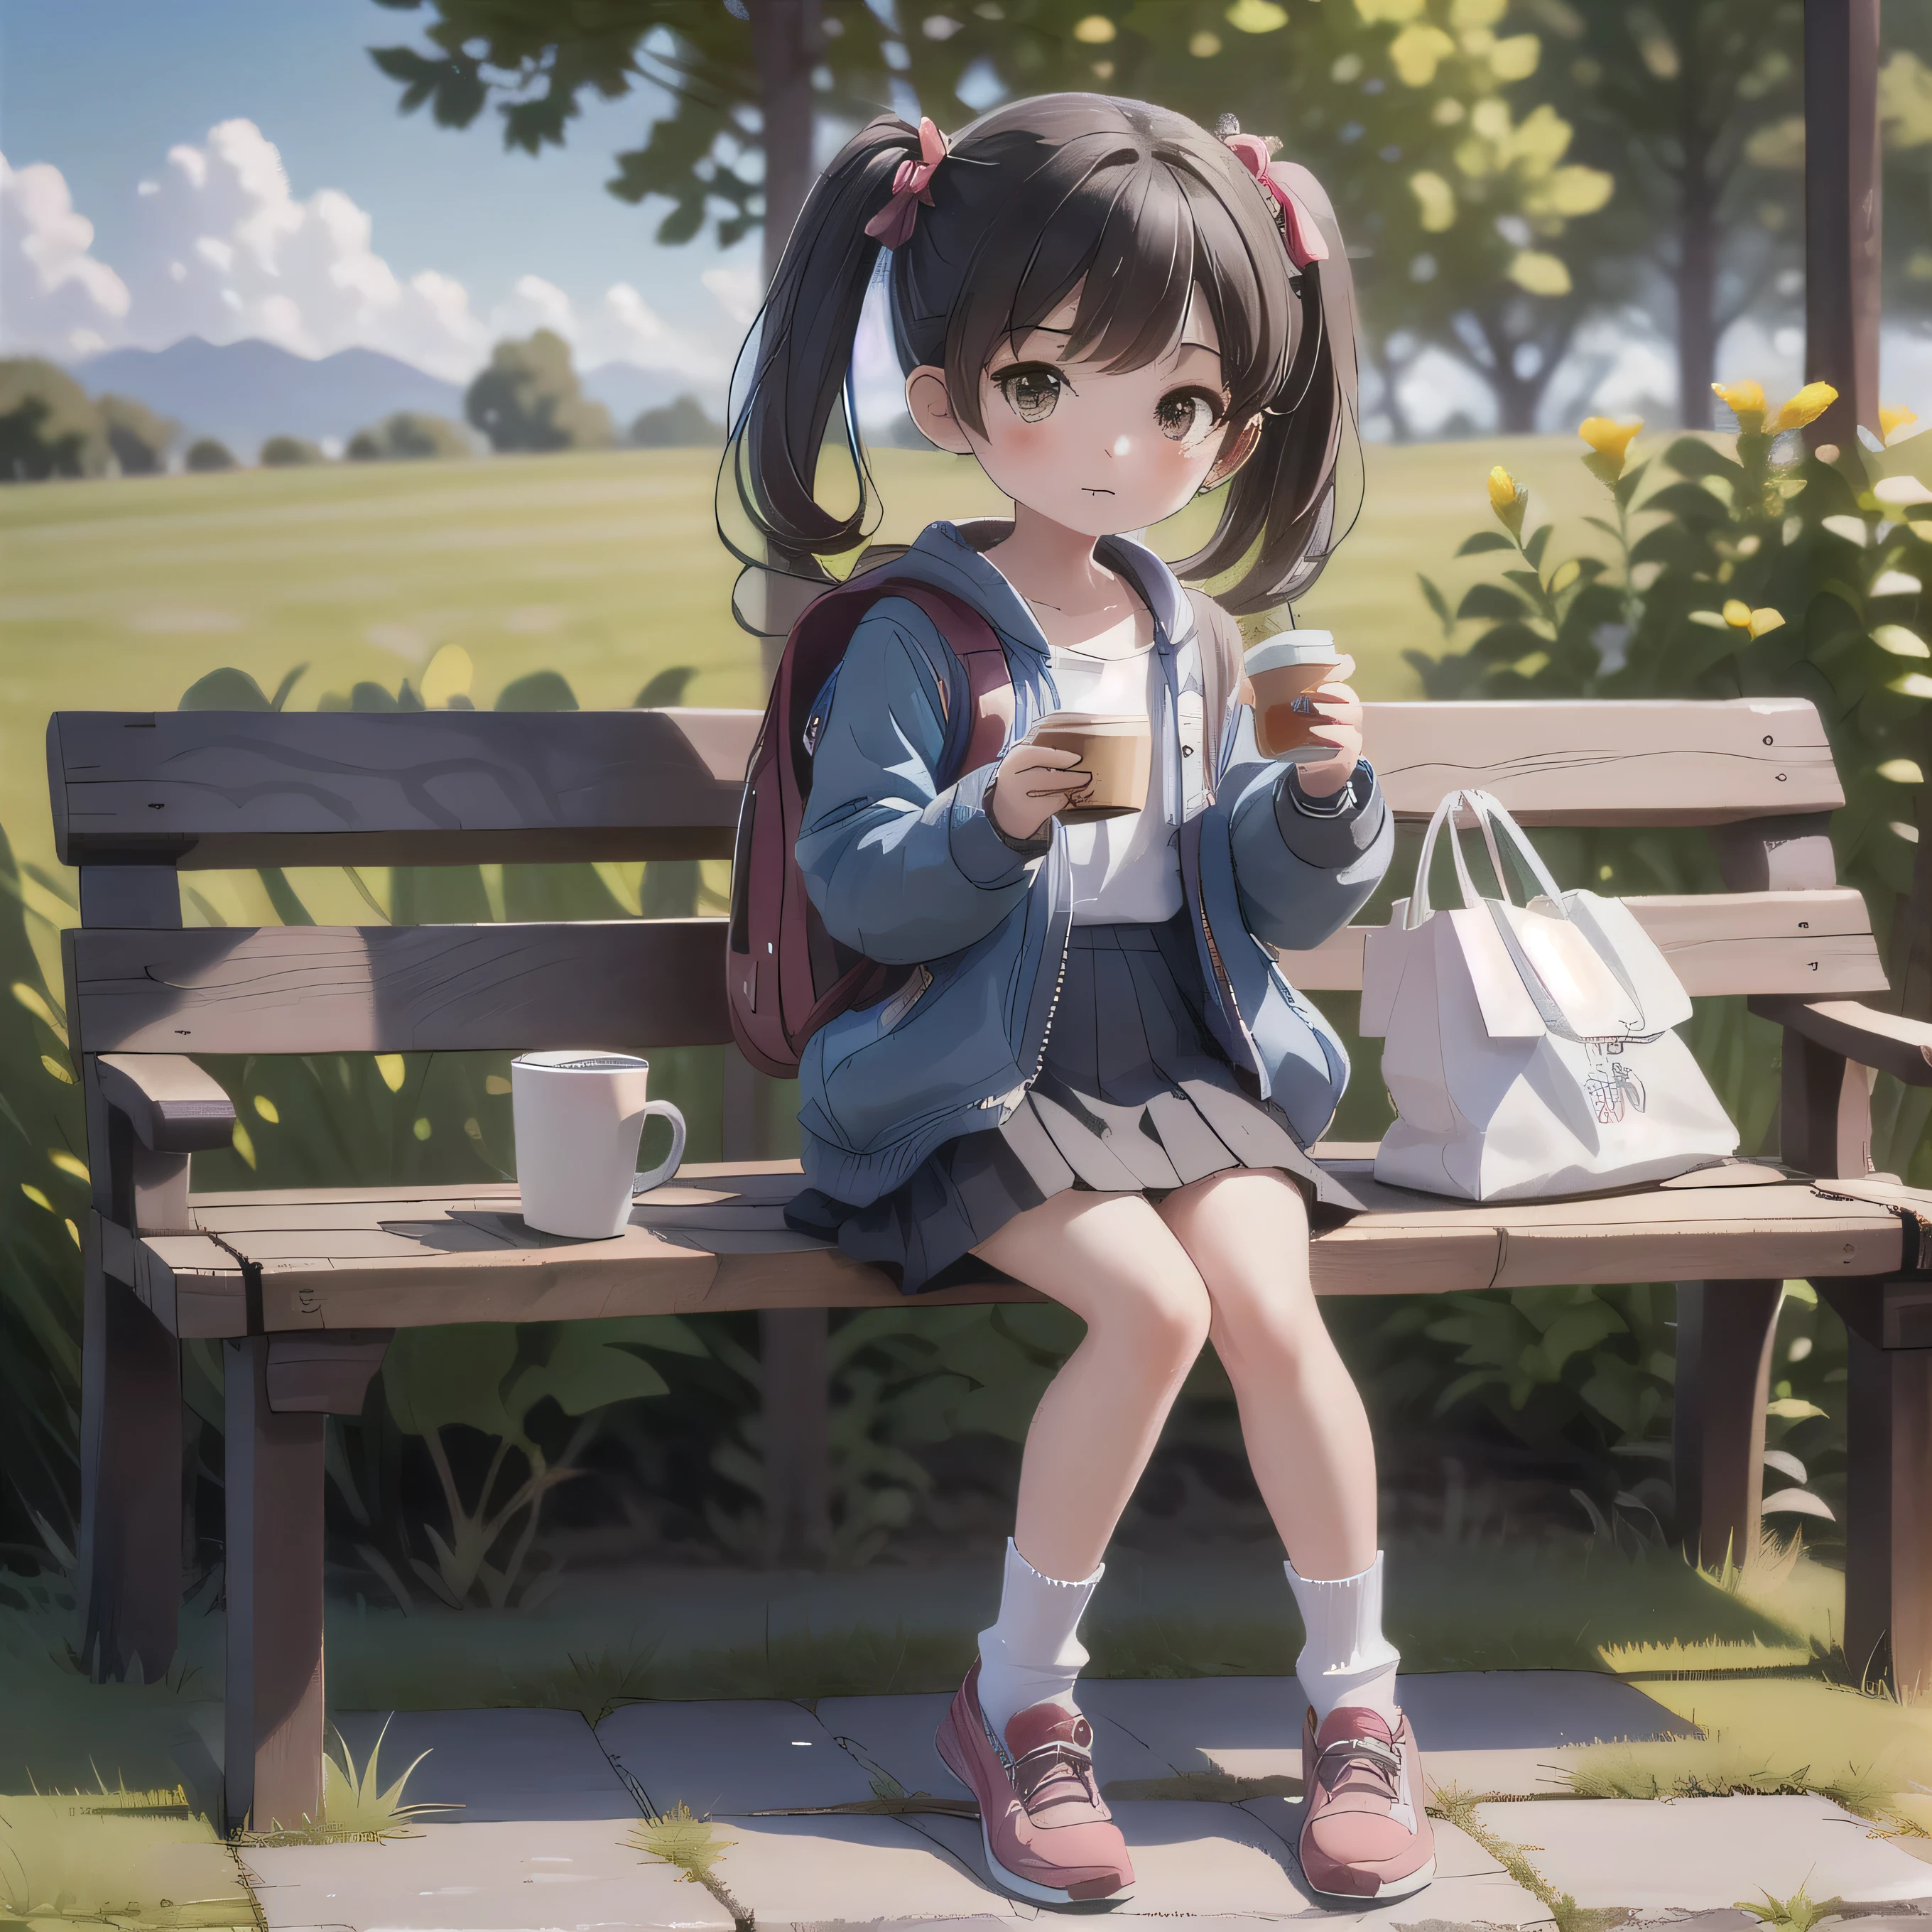 masterpiece，highest quality，One Girl，alone,Backpack，drinking，bag，Twin tails，Sitting，Black Hair，waist clothes，Brown eyes，Outdoor，mini skirt，drinking straw，socks，Jacket around waist，Jacket，Sunburn，Ground vehicles，cup，drink，Long Hair，Day，scenery，Brown Hair，bench，Power lines，Grass，a bit，Hamburger paper bag，